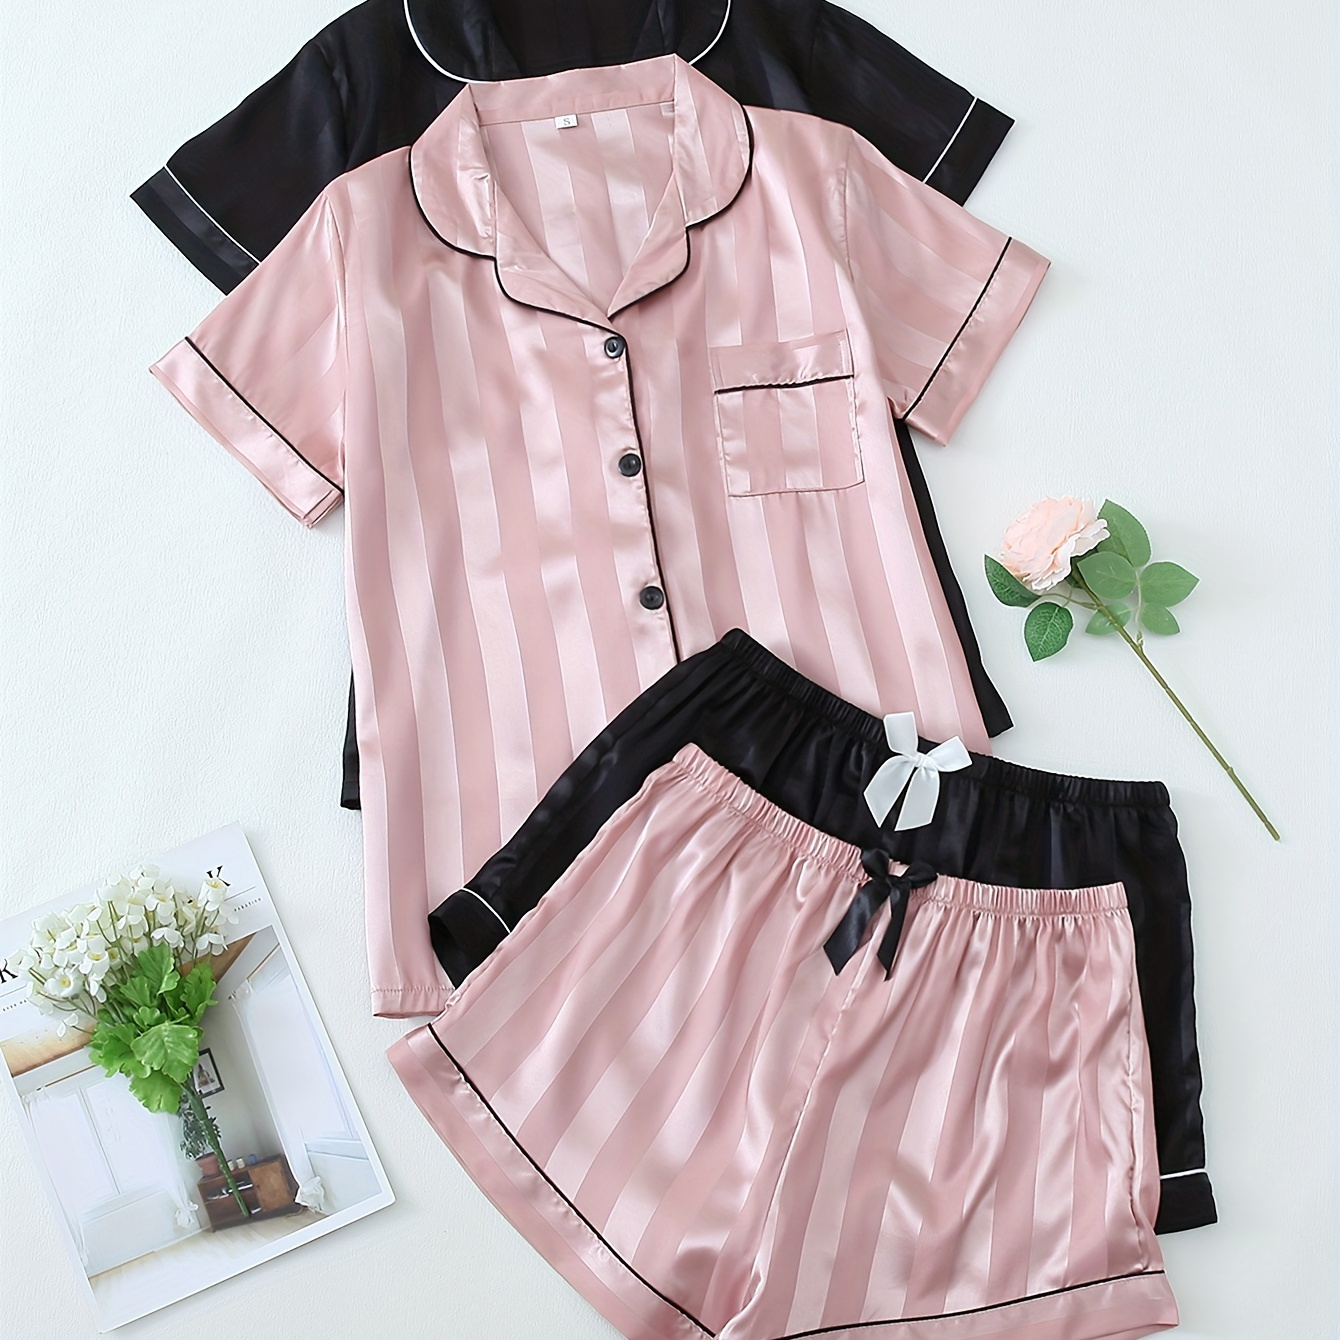 

2 Sets Women's Striped Satin Casual Pajama Set, Short Sleeve Buttons Lapel Top & Shorts, Comfortable Relaxed Fit